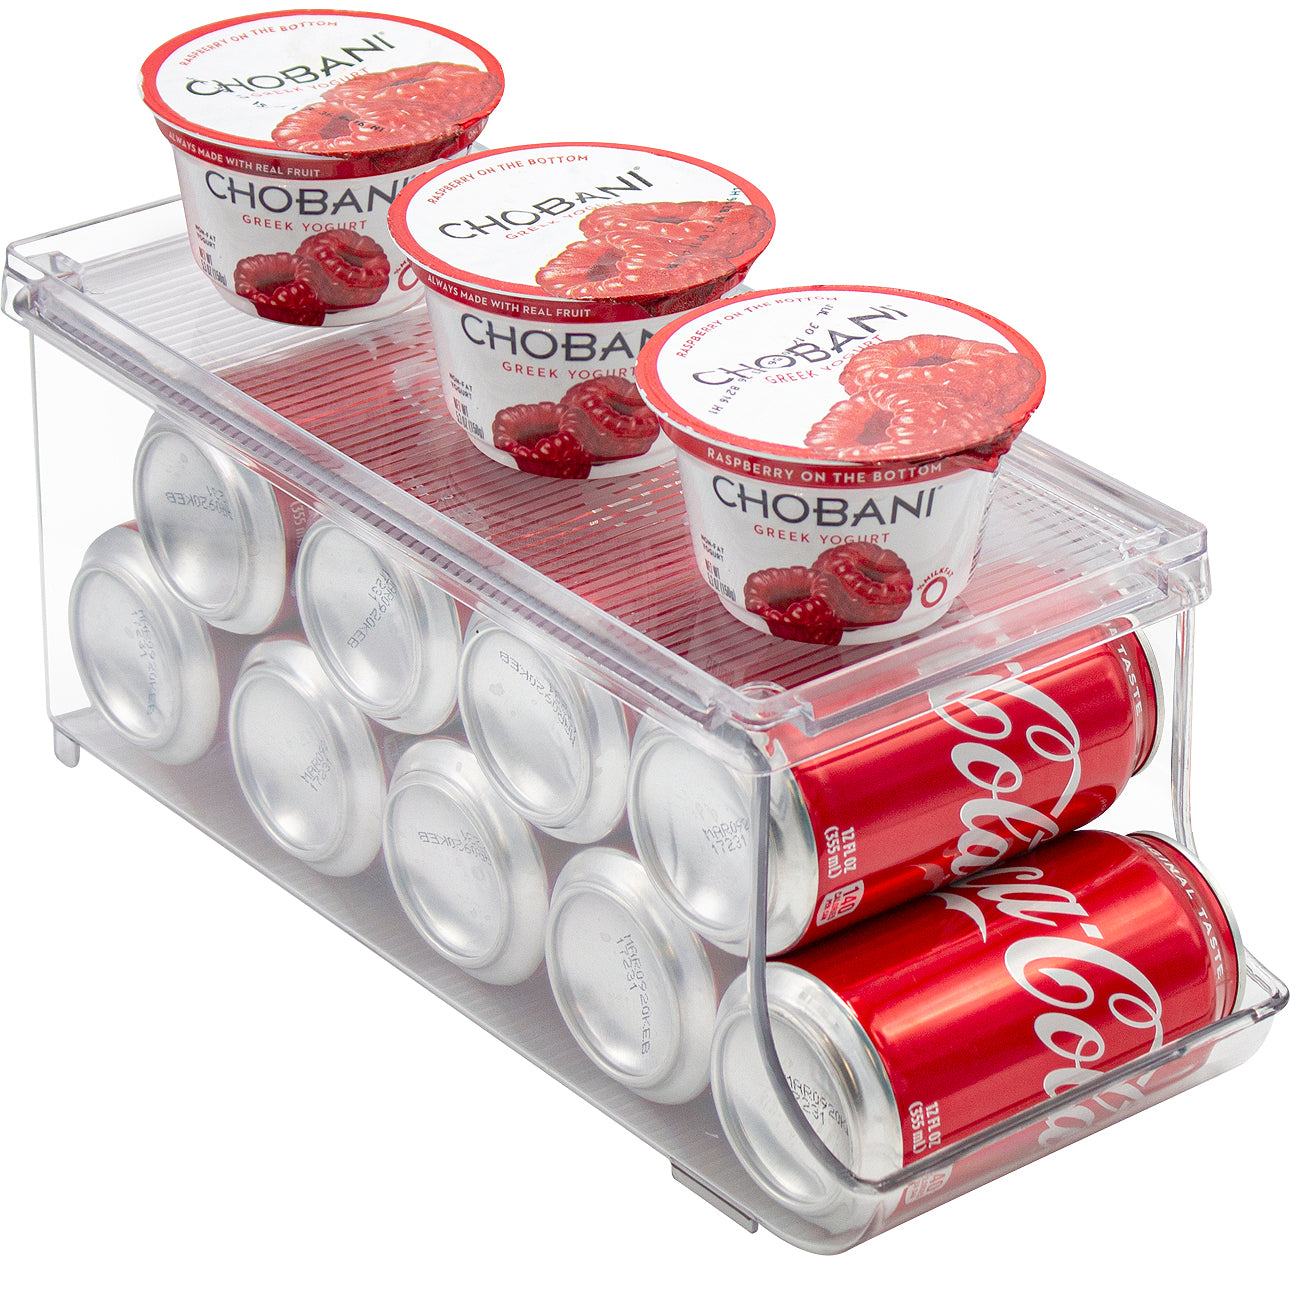 Sorbus Soda Can Organizer for Refrigerator Stackable Can Holder Dispenser with Lid for Fridge, Pantry, Freezer - Holds 12 Cans Each, BPA-Free, Clear